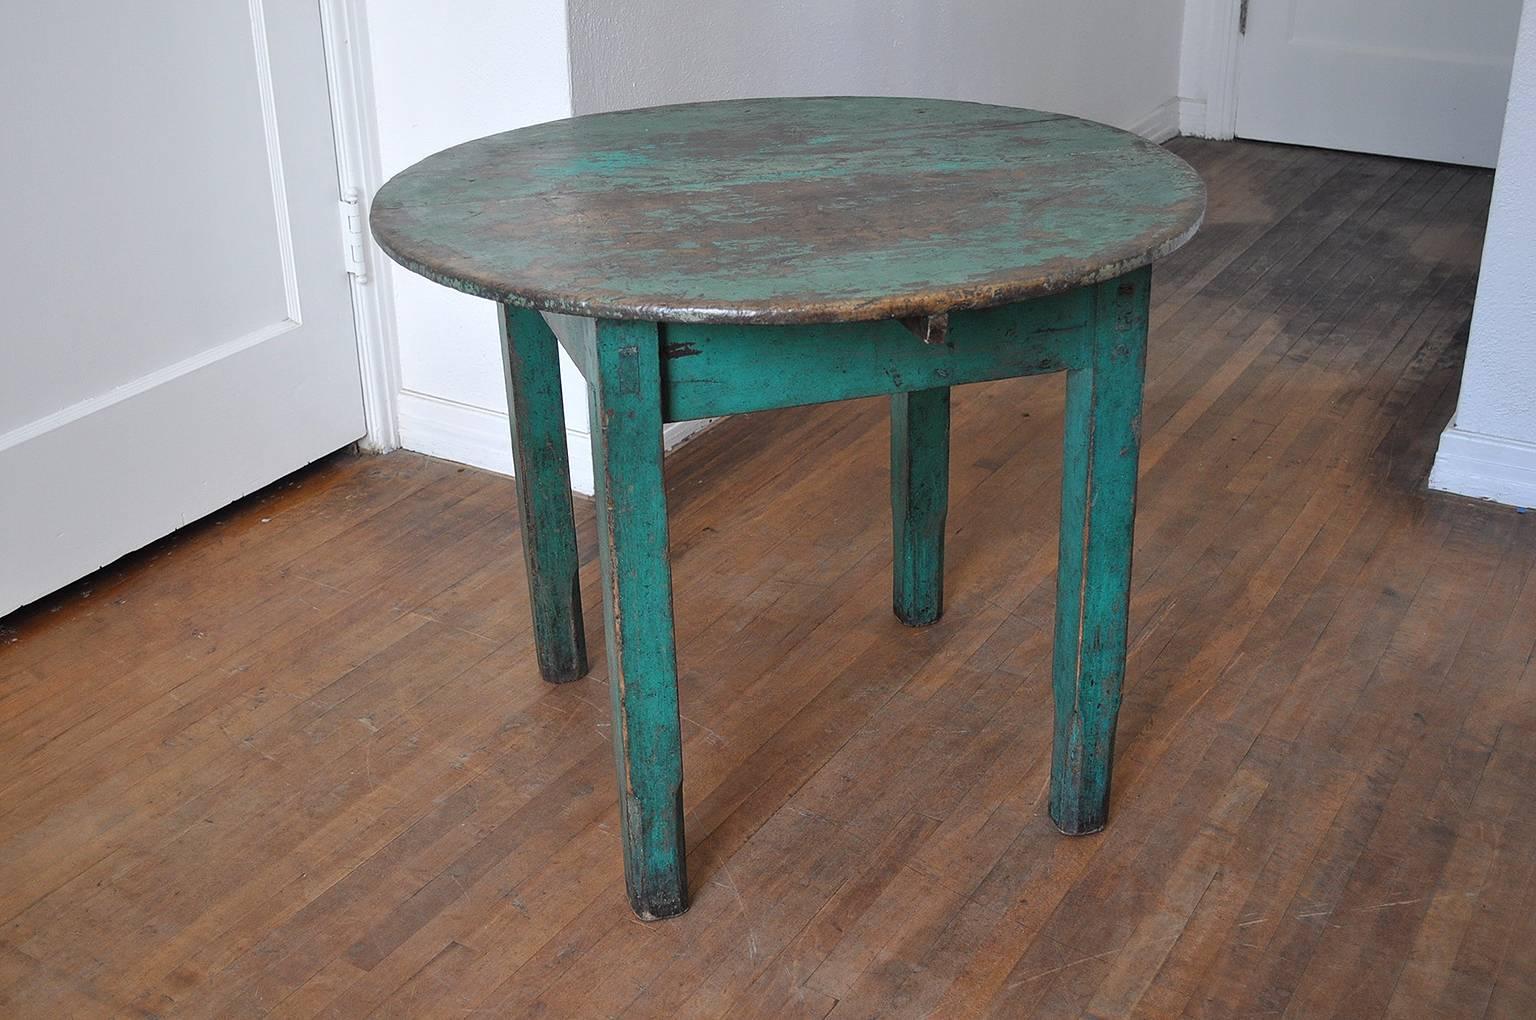 Spanish Colonial Handmade, 1940s Table from Guatemala with Beautiful Patina